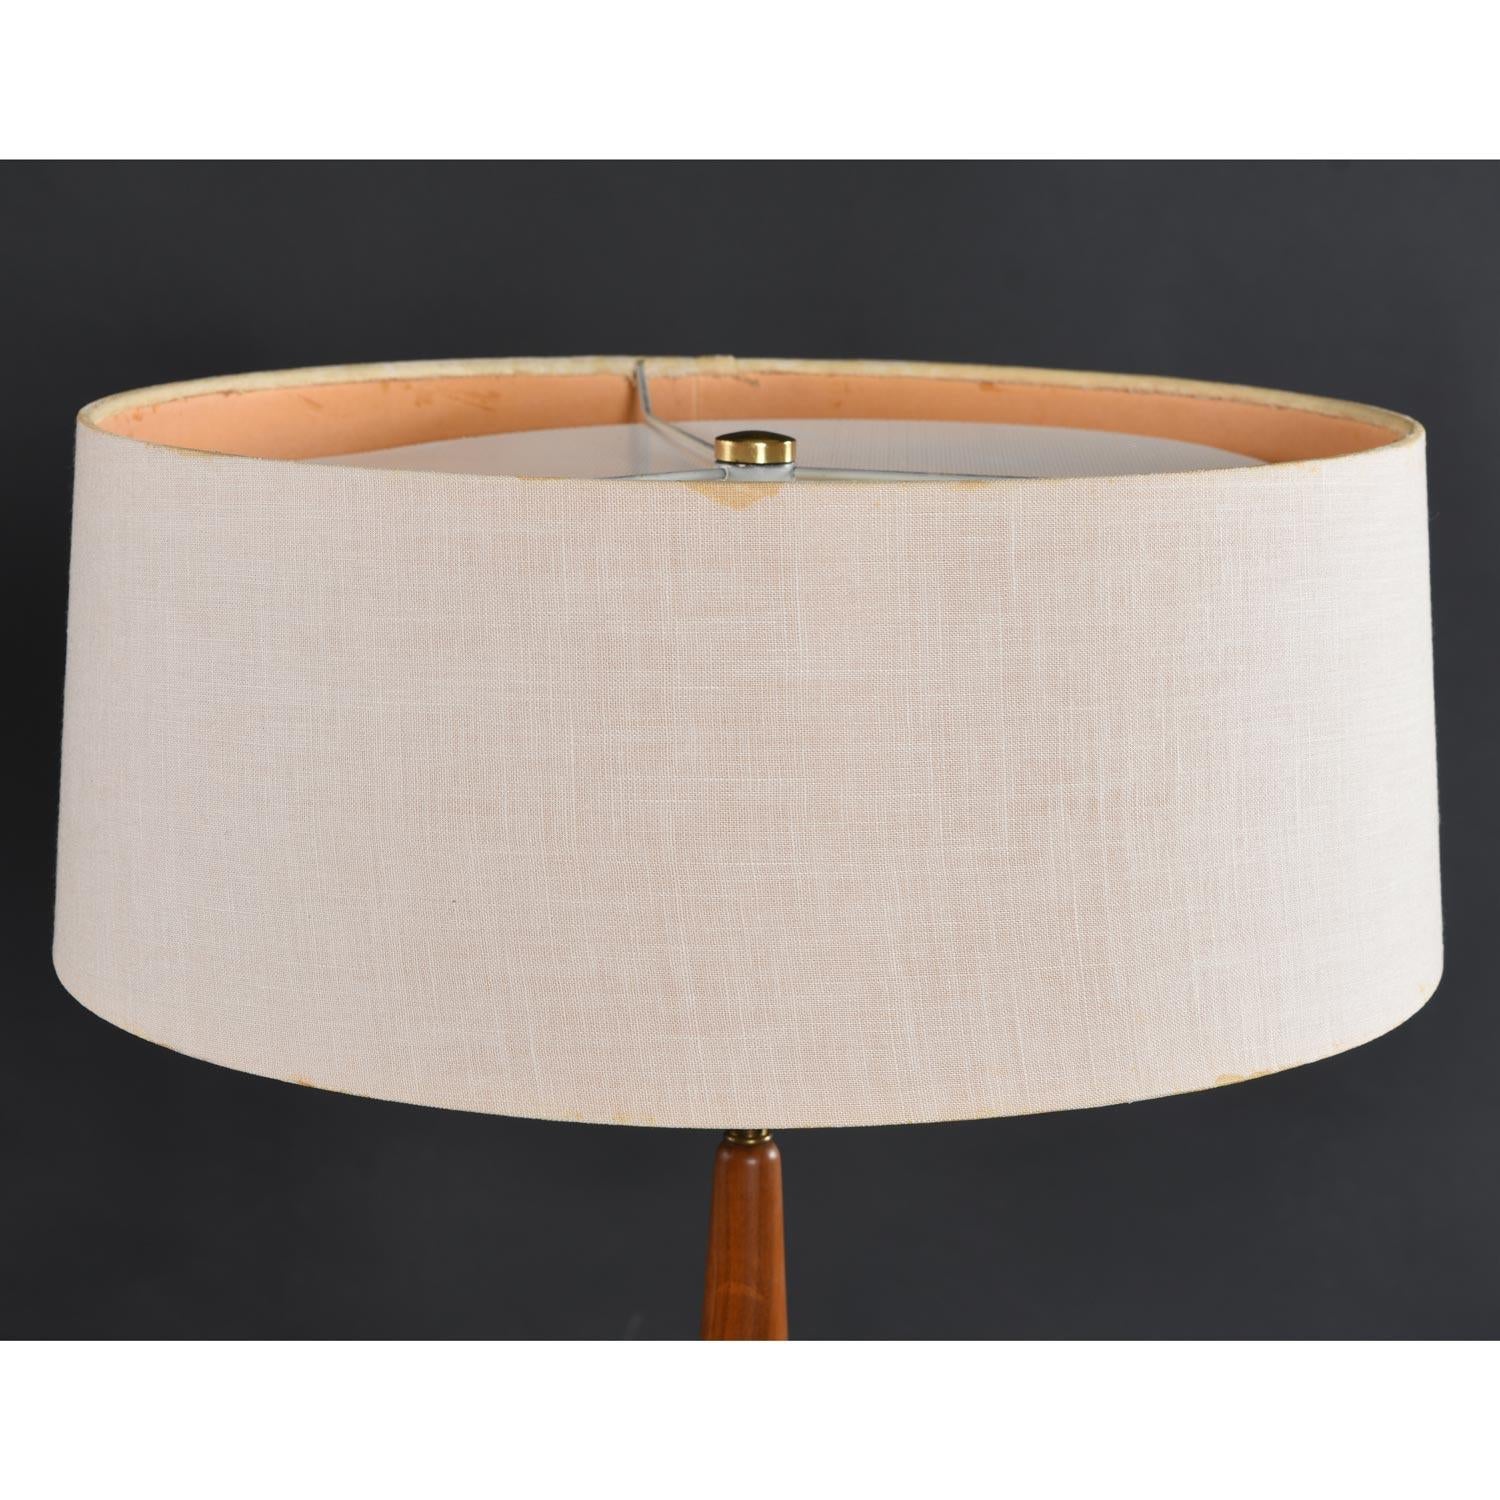 American Gerald Thurston for Lightolier Walnut and Brass Tapered Table Lamp